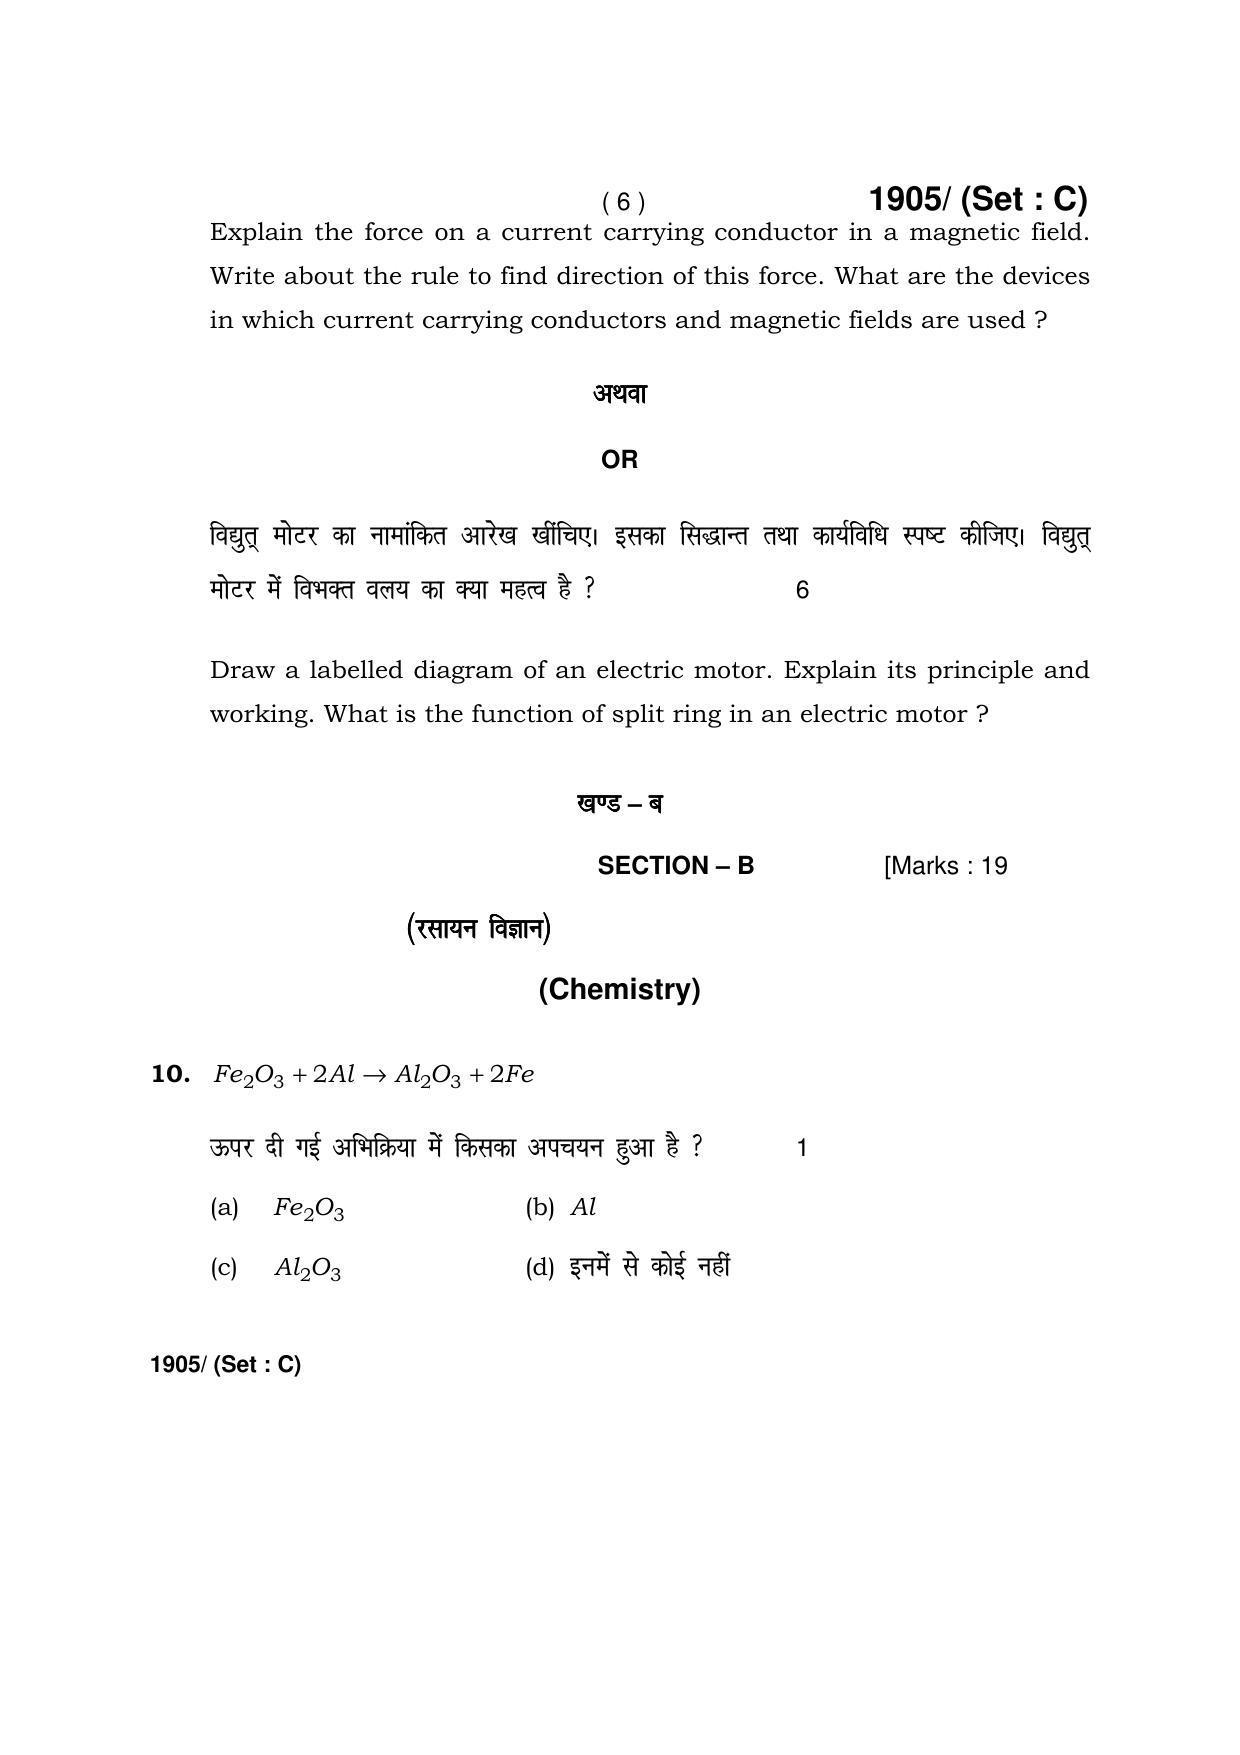 Haryana Board HBSE Class 10 Science -C 2017 Question Paper - Page 6